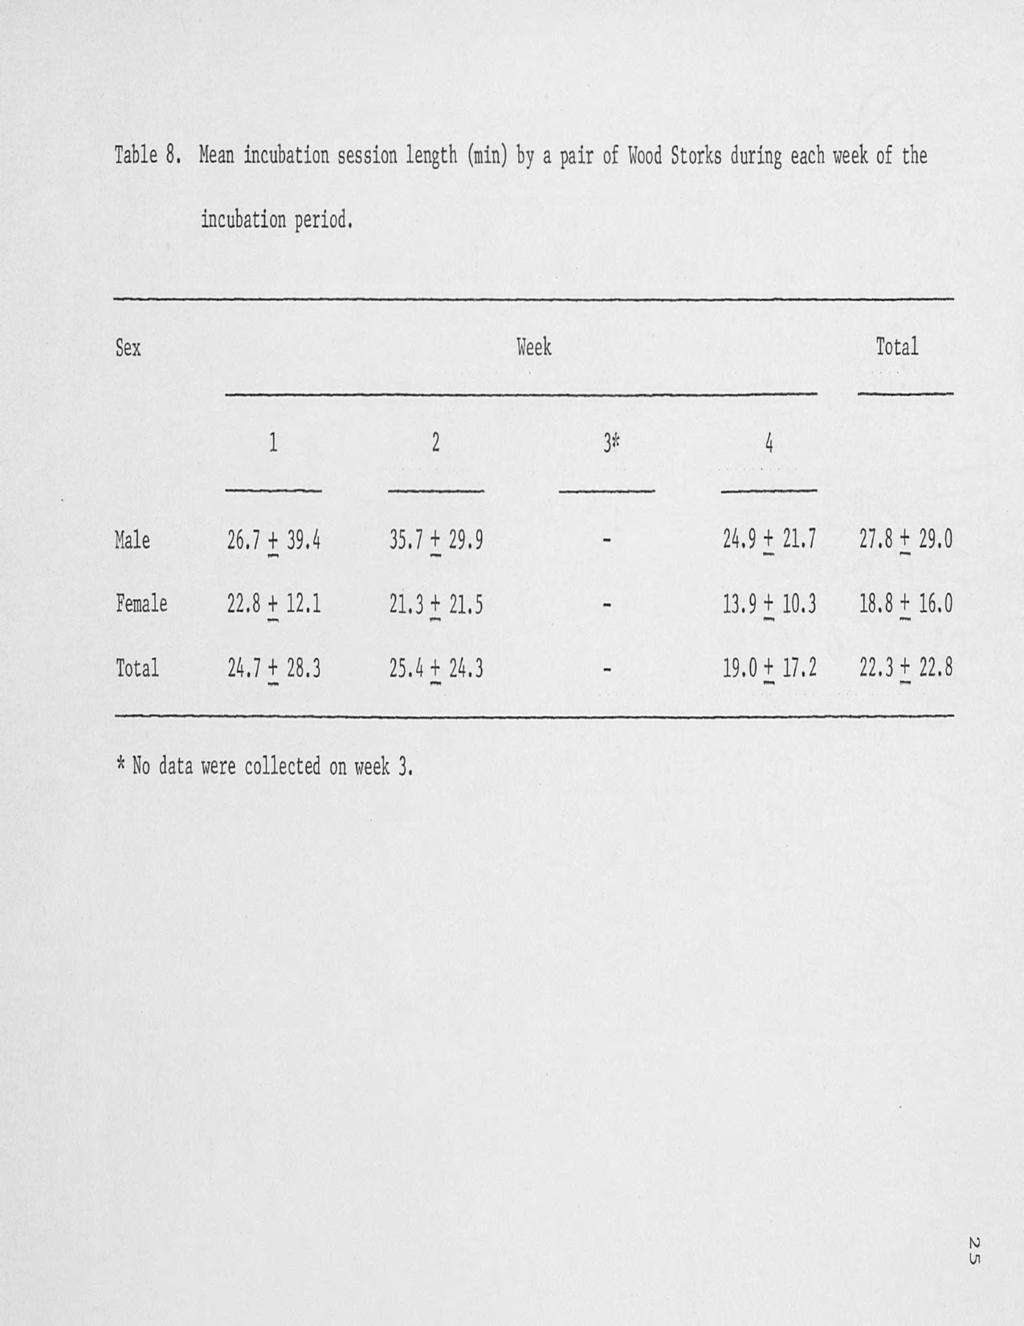 Table 8. Mean incubation session length (min) by a pair of Wood Storks during each week of the Sex Week Total Male 26.7 + 39.4 35.7 + 29.9 24.9 + 21.7 27.8 + 29.